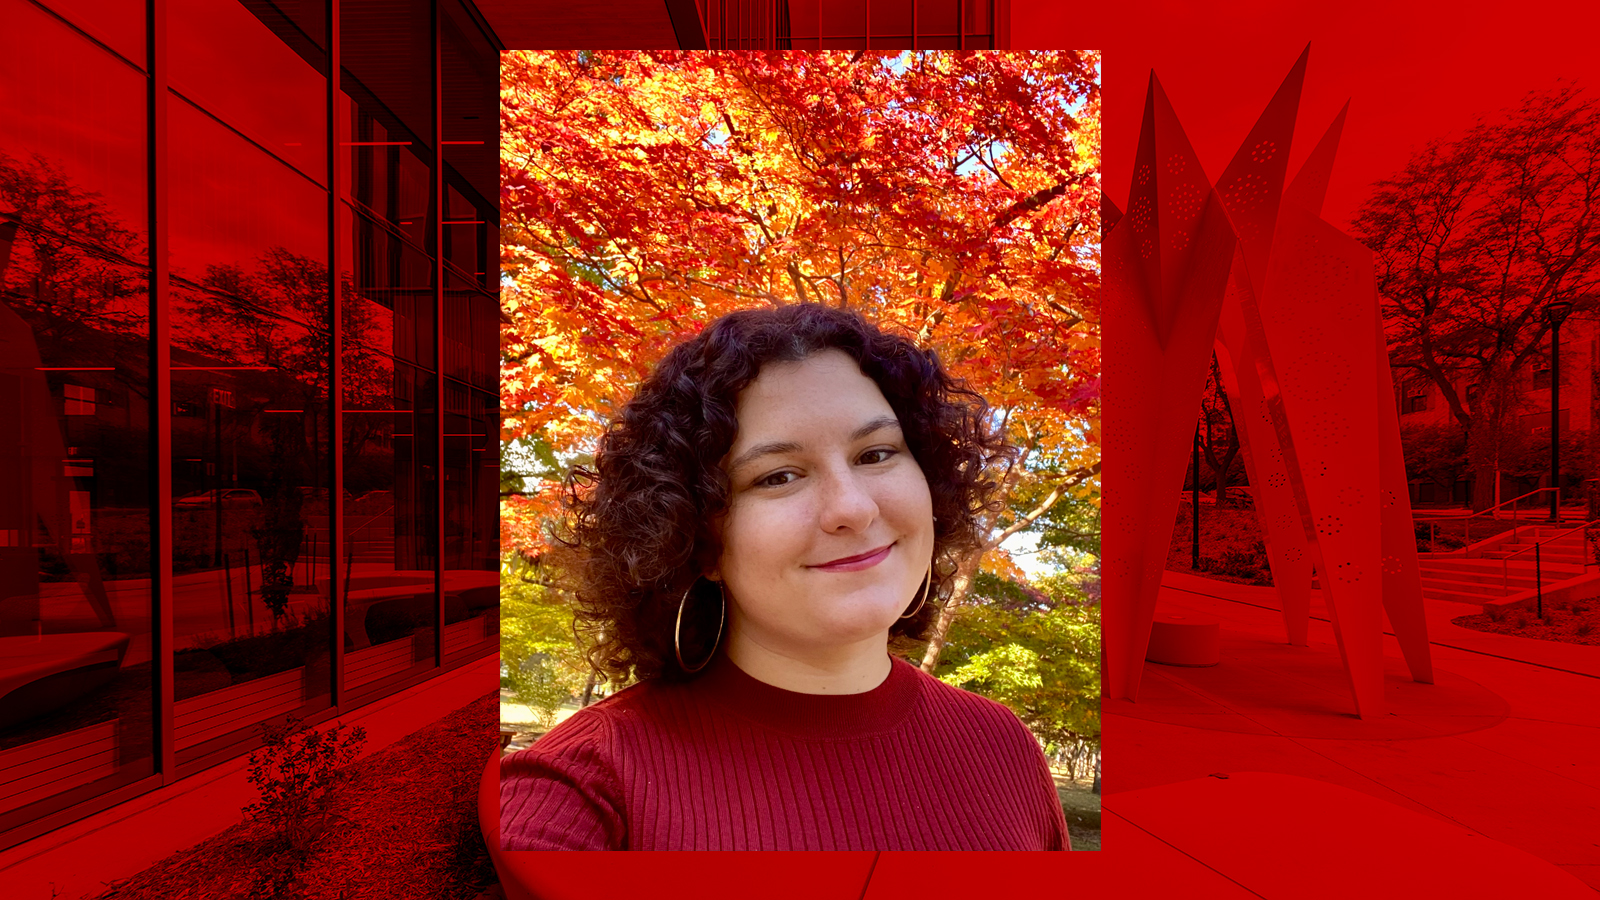 Molly Sambol headshot with autumn leaves on tree in background, campus photo with red overlay behind